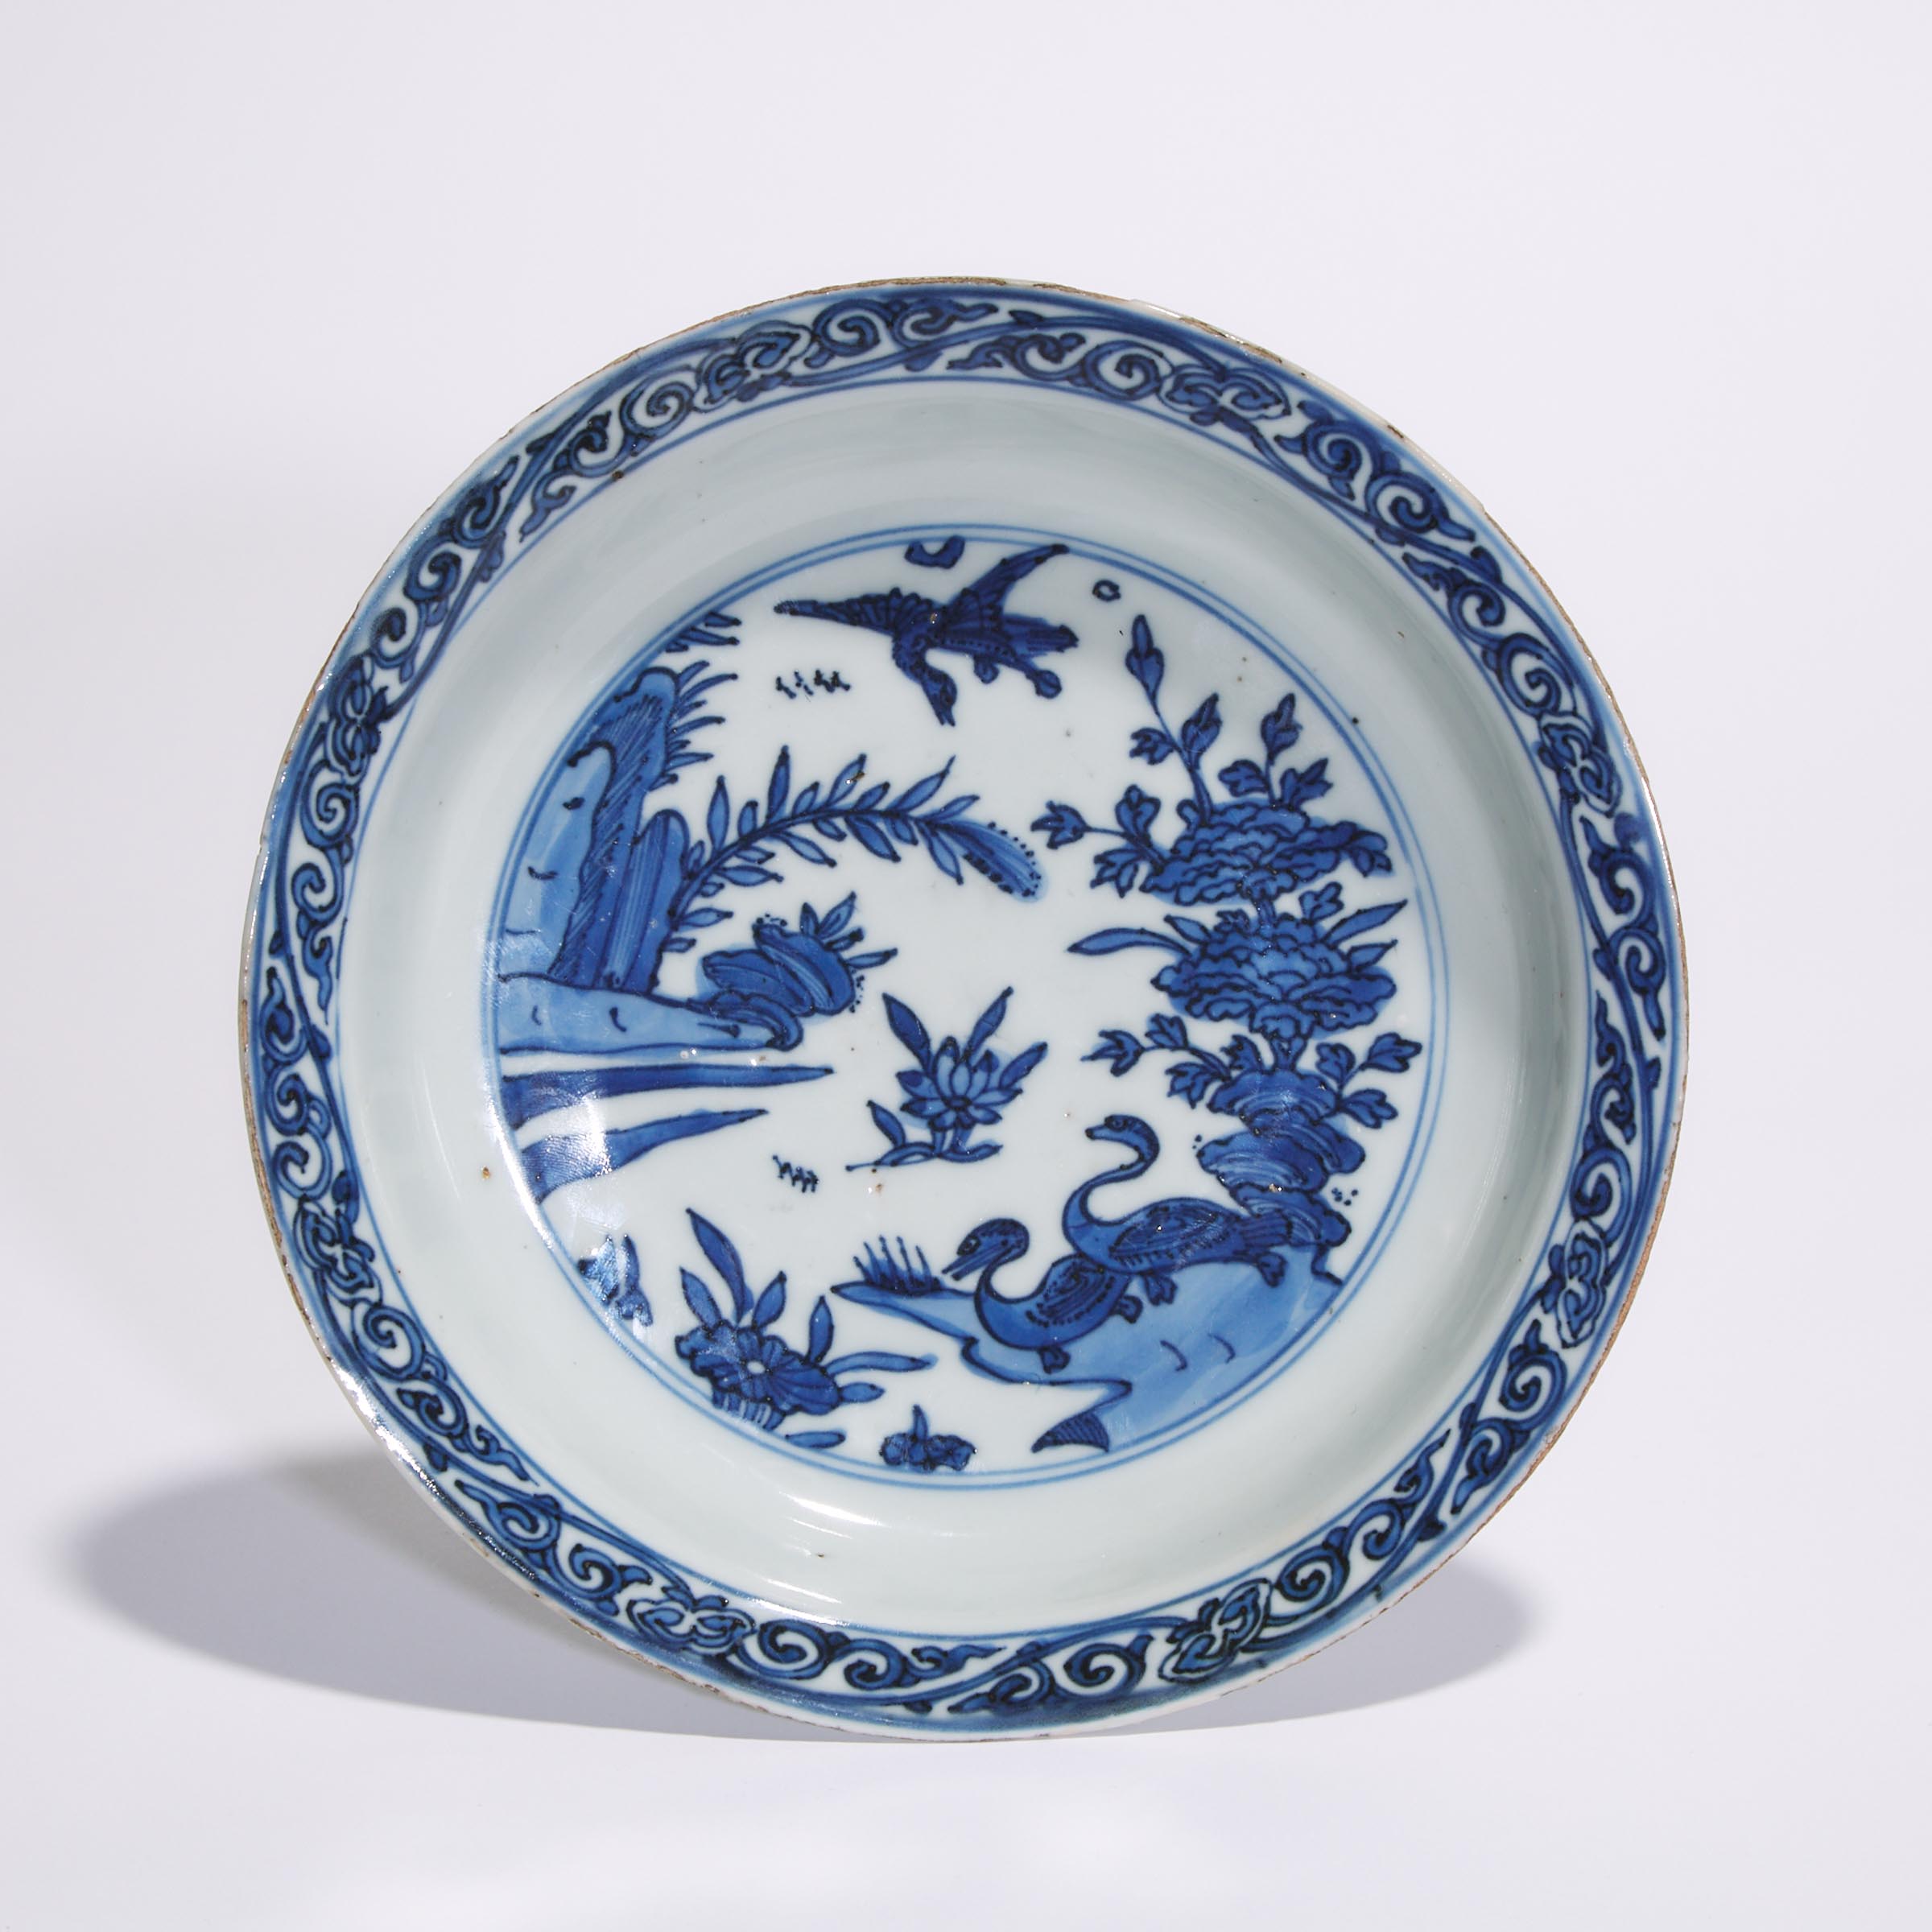 A Chinese Blue and White 'Duck' Dish, Wanli Period (1573-1619)